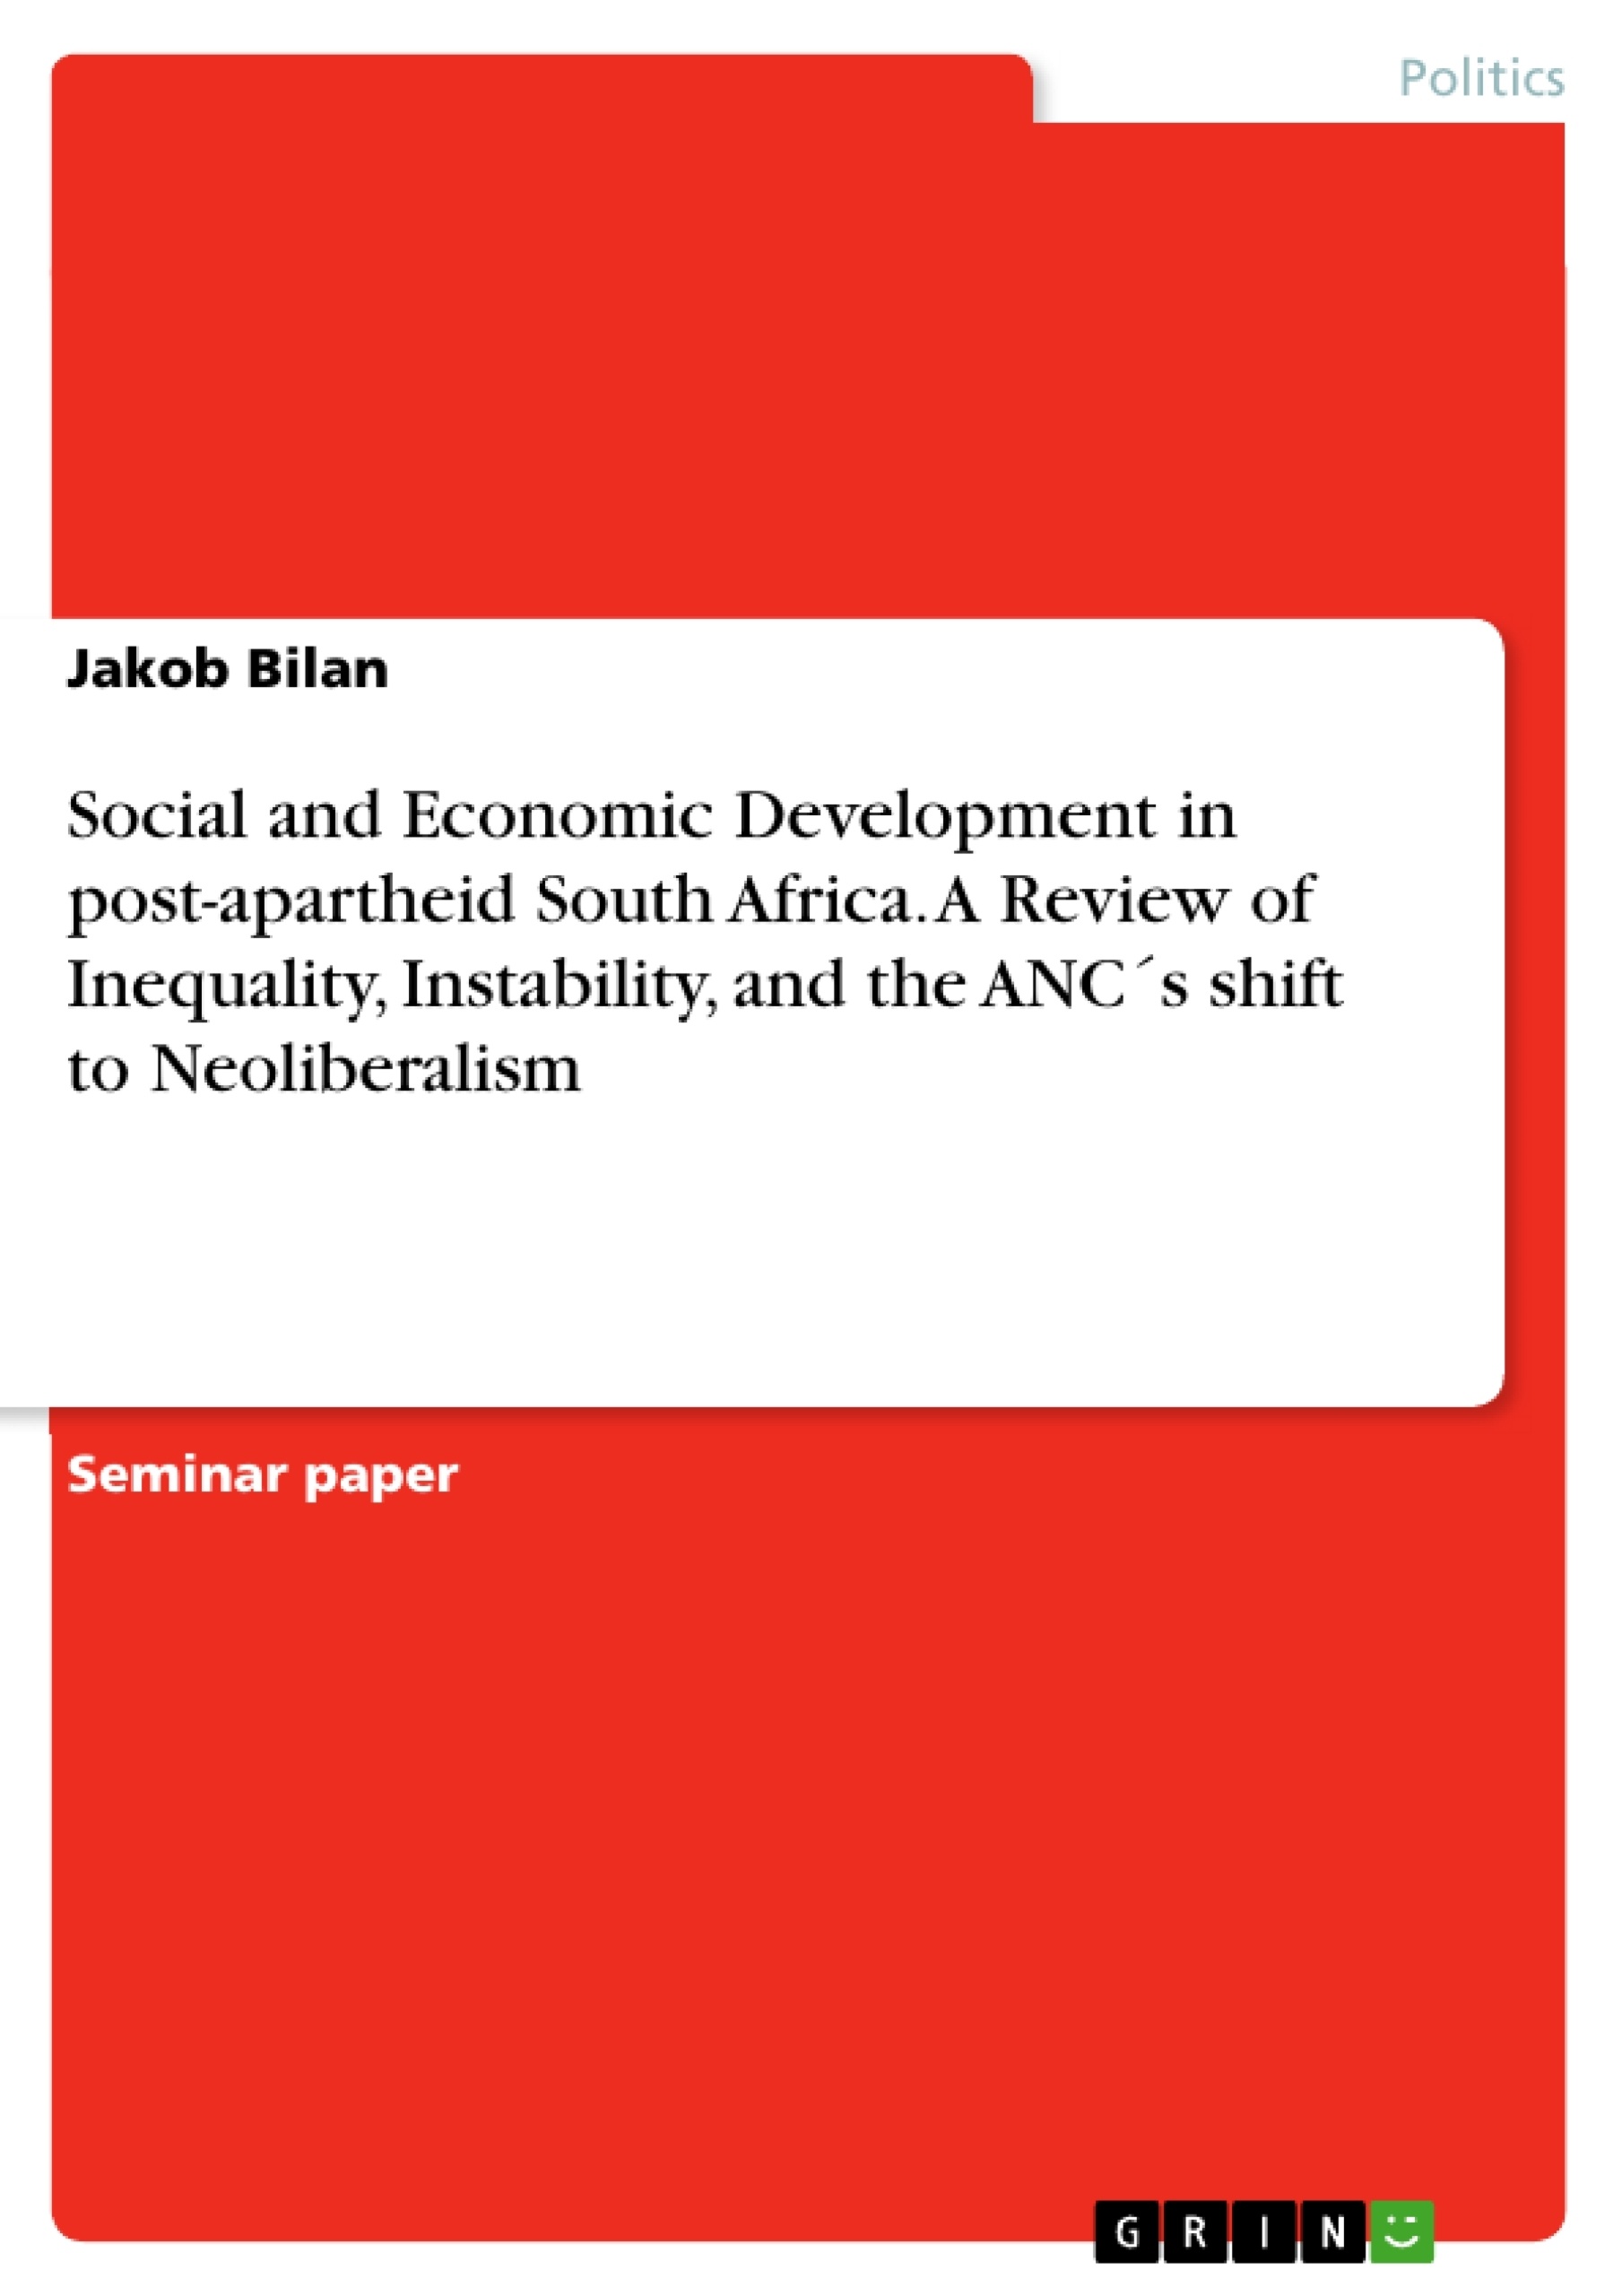 Título: Social and Economic Development in post-apartheid South Africa. A Review of Inequality, Instability, and the ANC´s shift to Neoliberalism